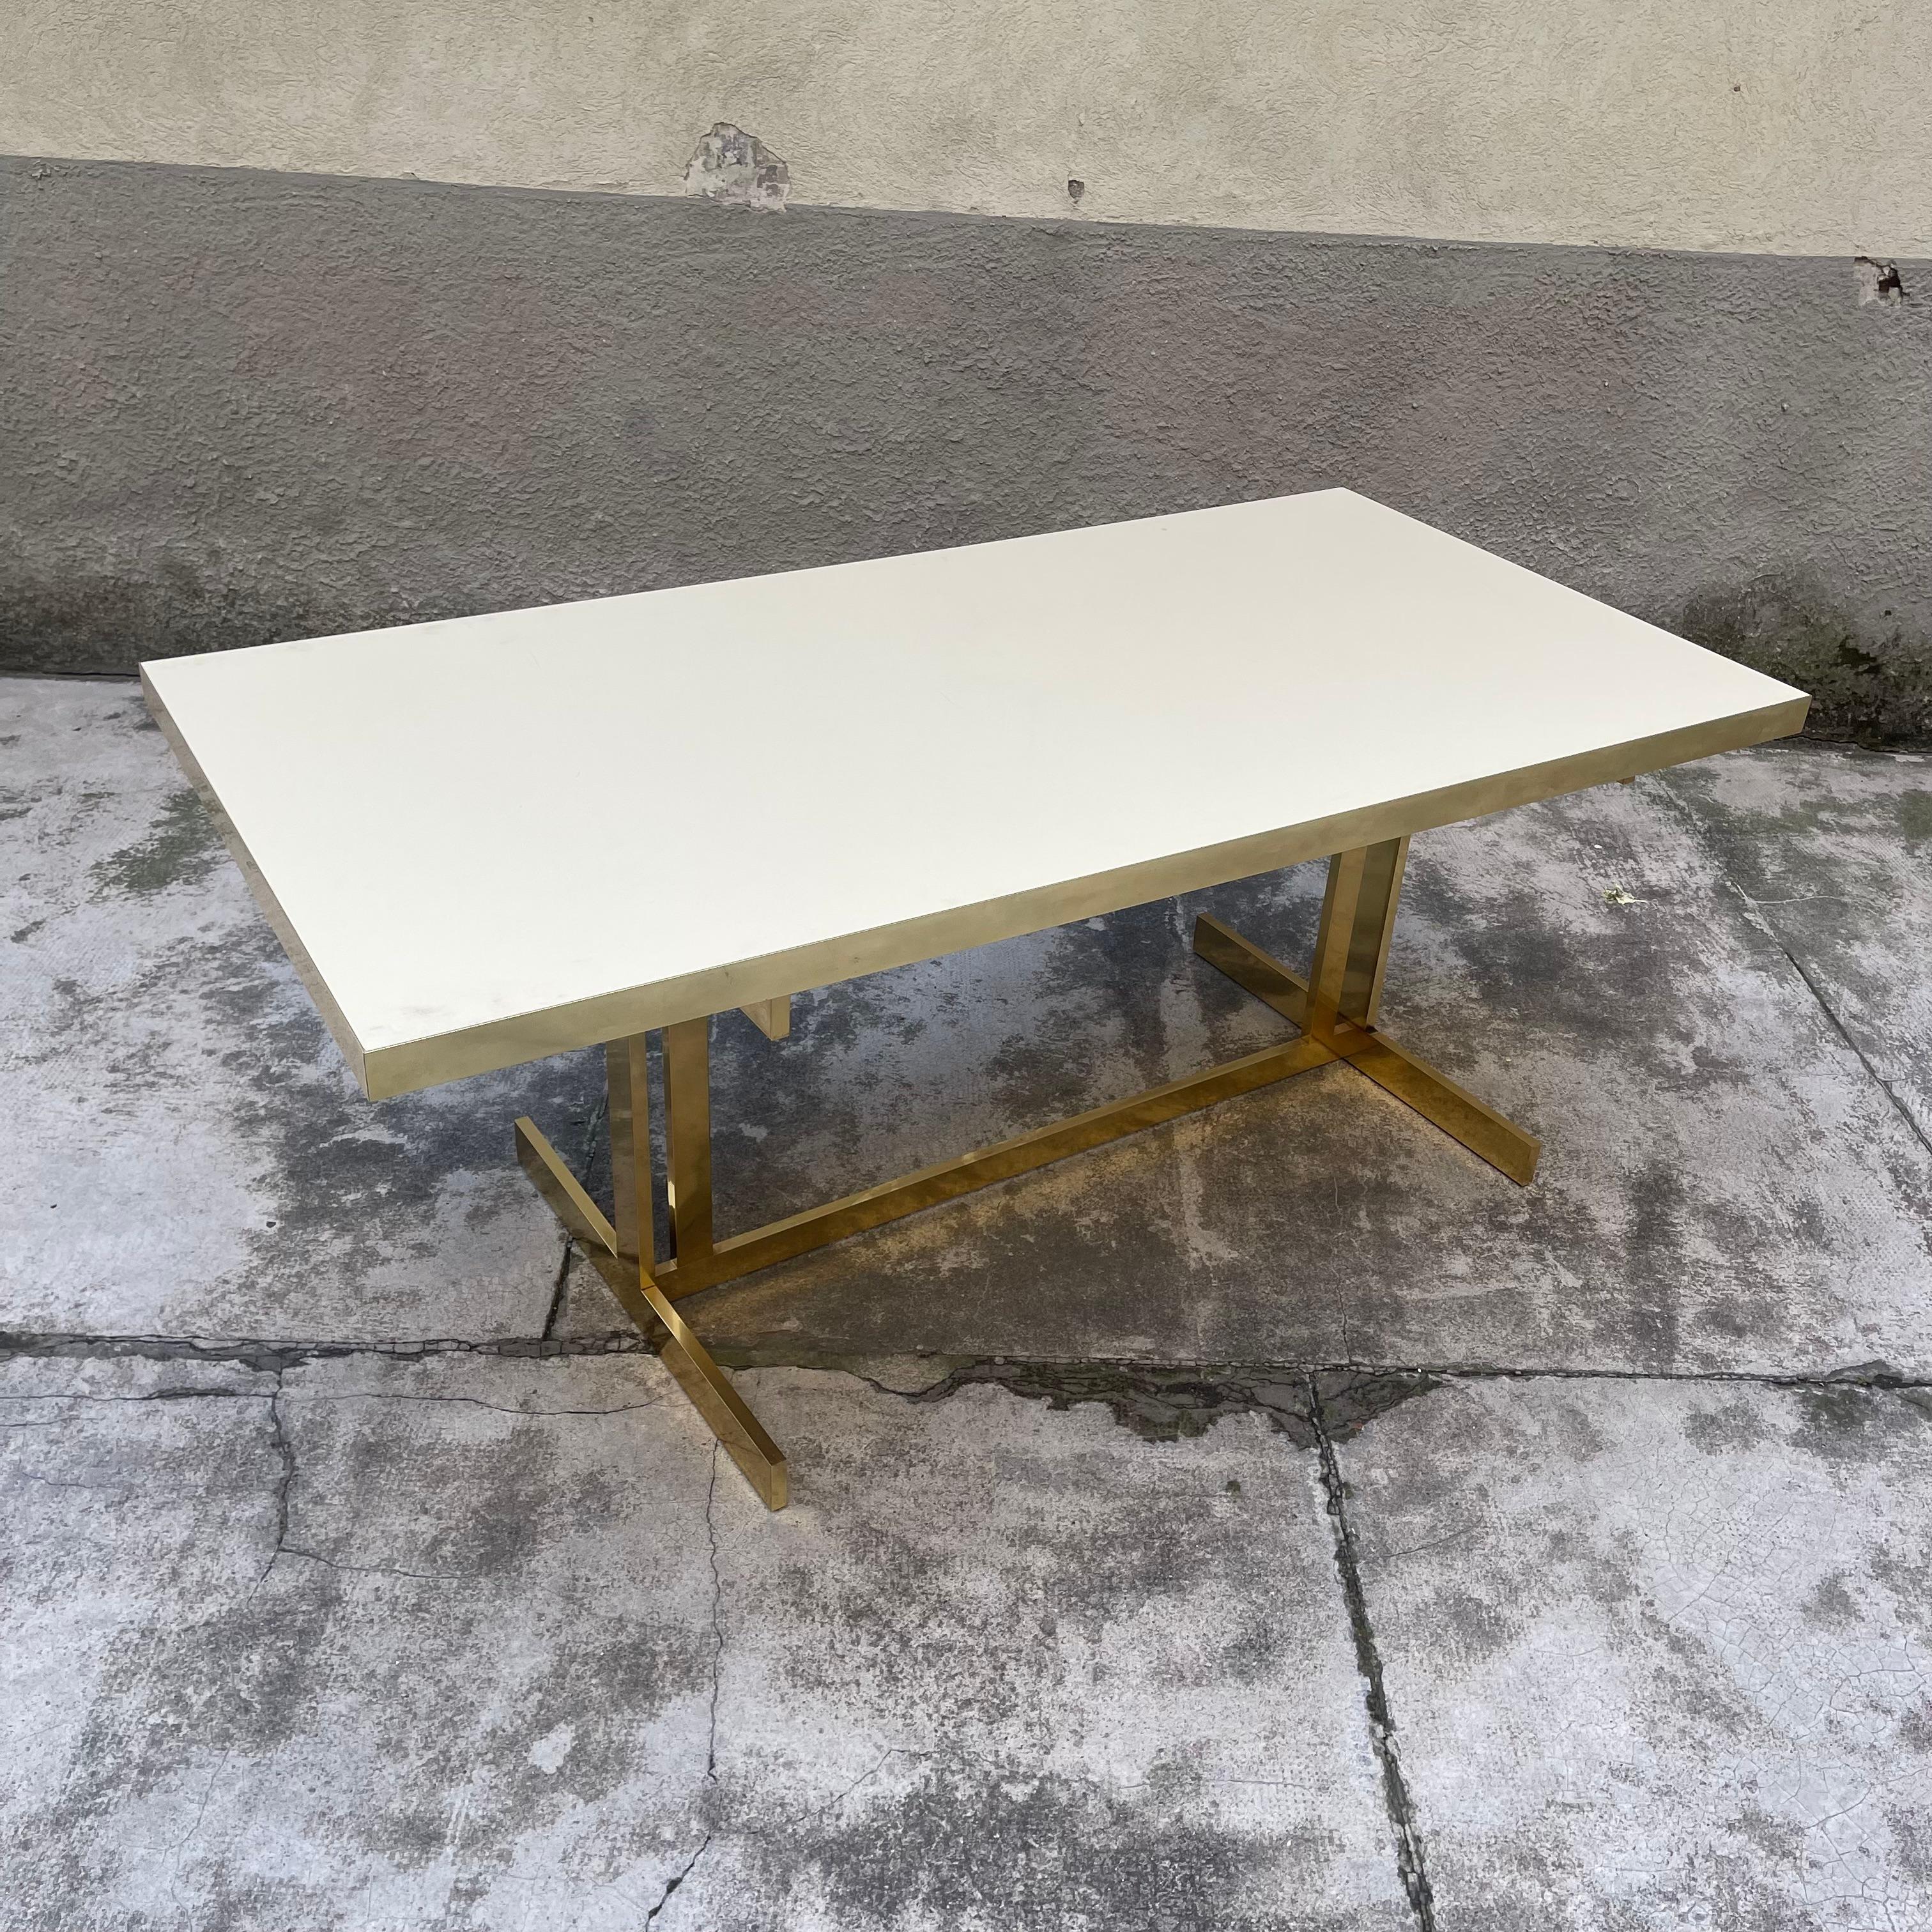 This marvel of a table consists of a rectangular-section brass tubular frame supporting a massive ivory-colored laminate top edged with brass bands. It can be accompanied by 4 chairs of the same manufacture, as visible from the photos. The latter